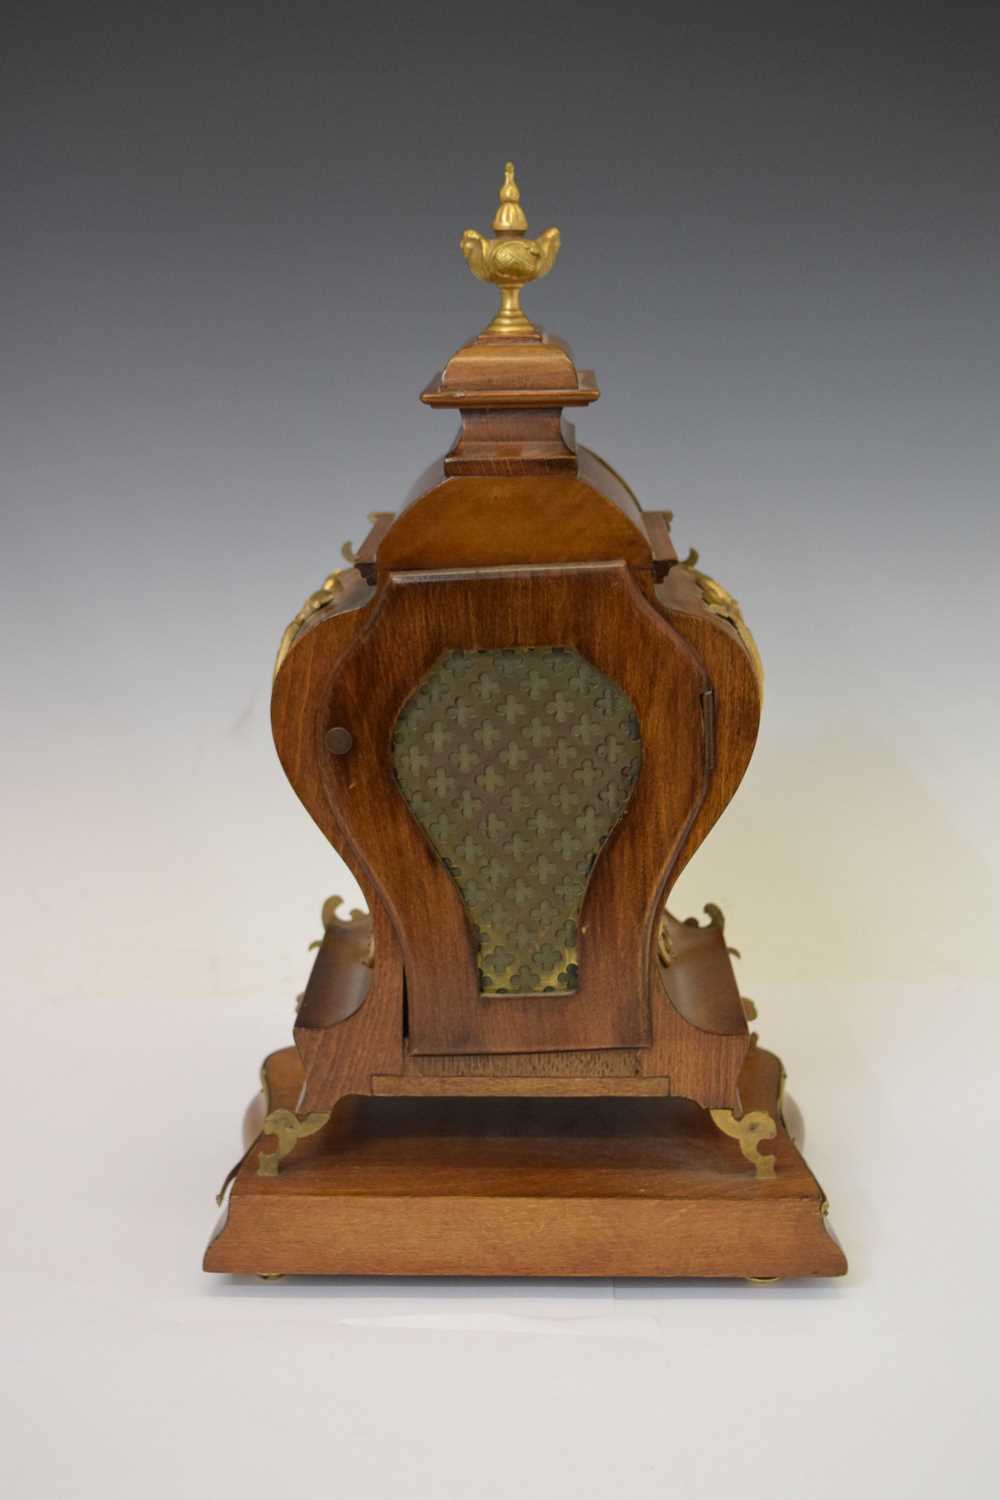 Early 20th century Lenzkirch French-style mantel clock - Image 6 of 11